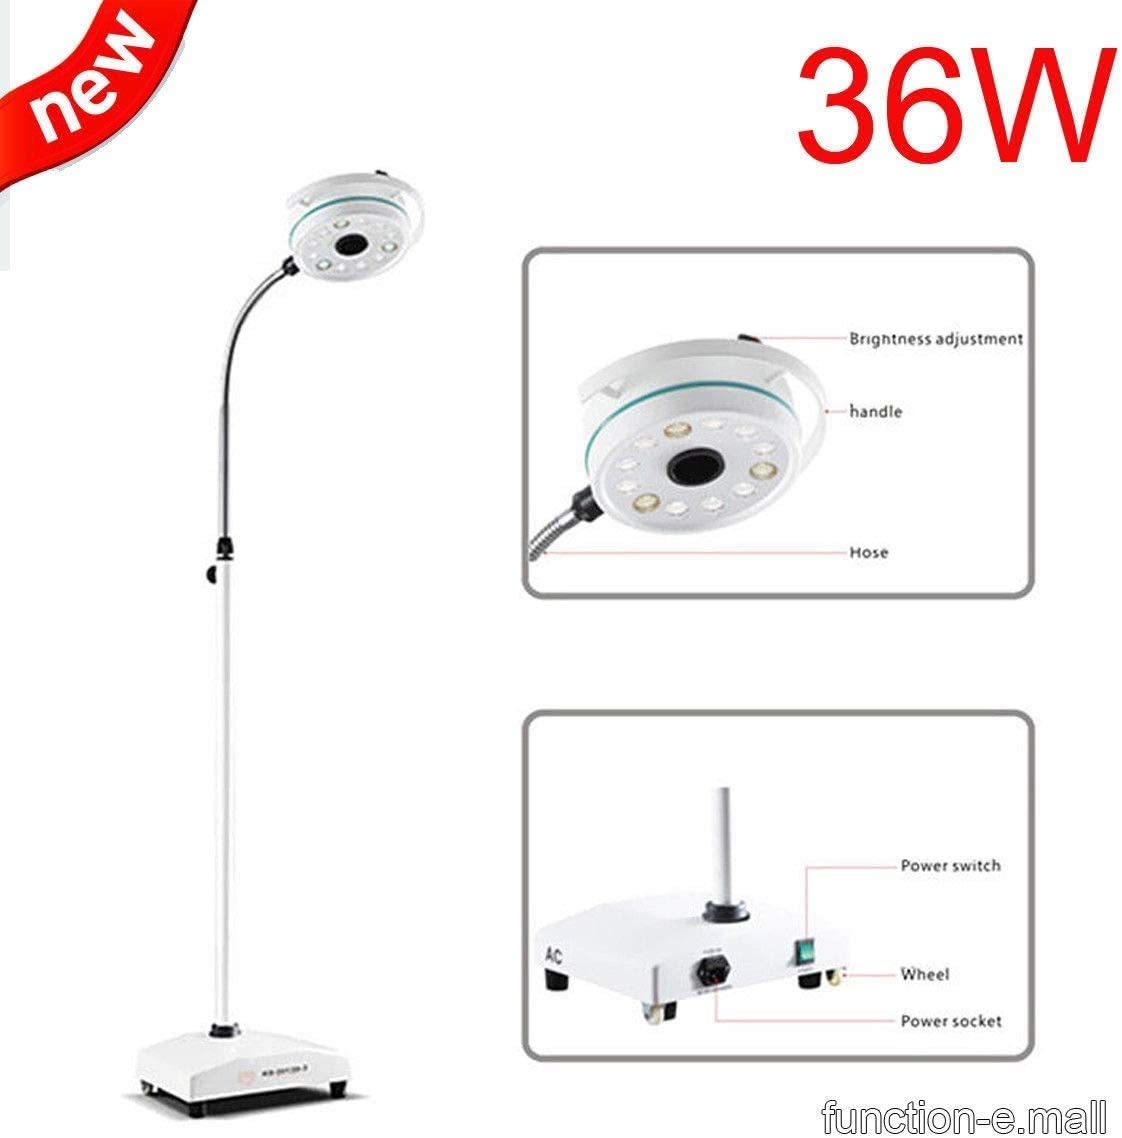 AC90-220V 36W Shadowless Exam Lamp Movable LED Surgical Medical Light